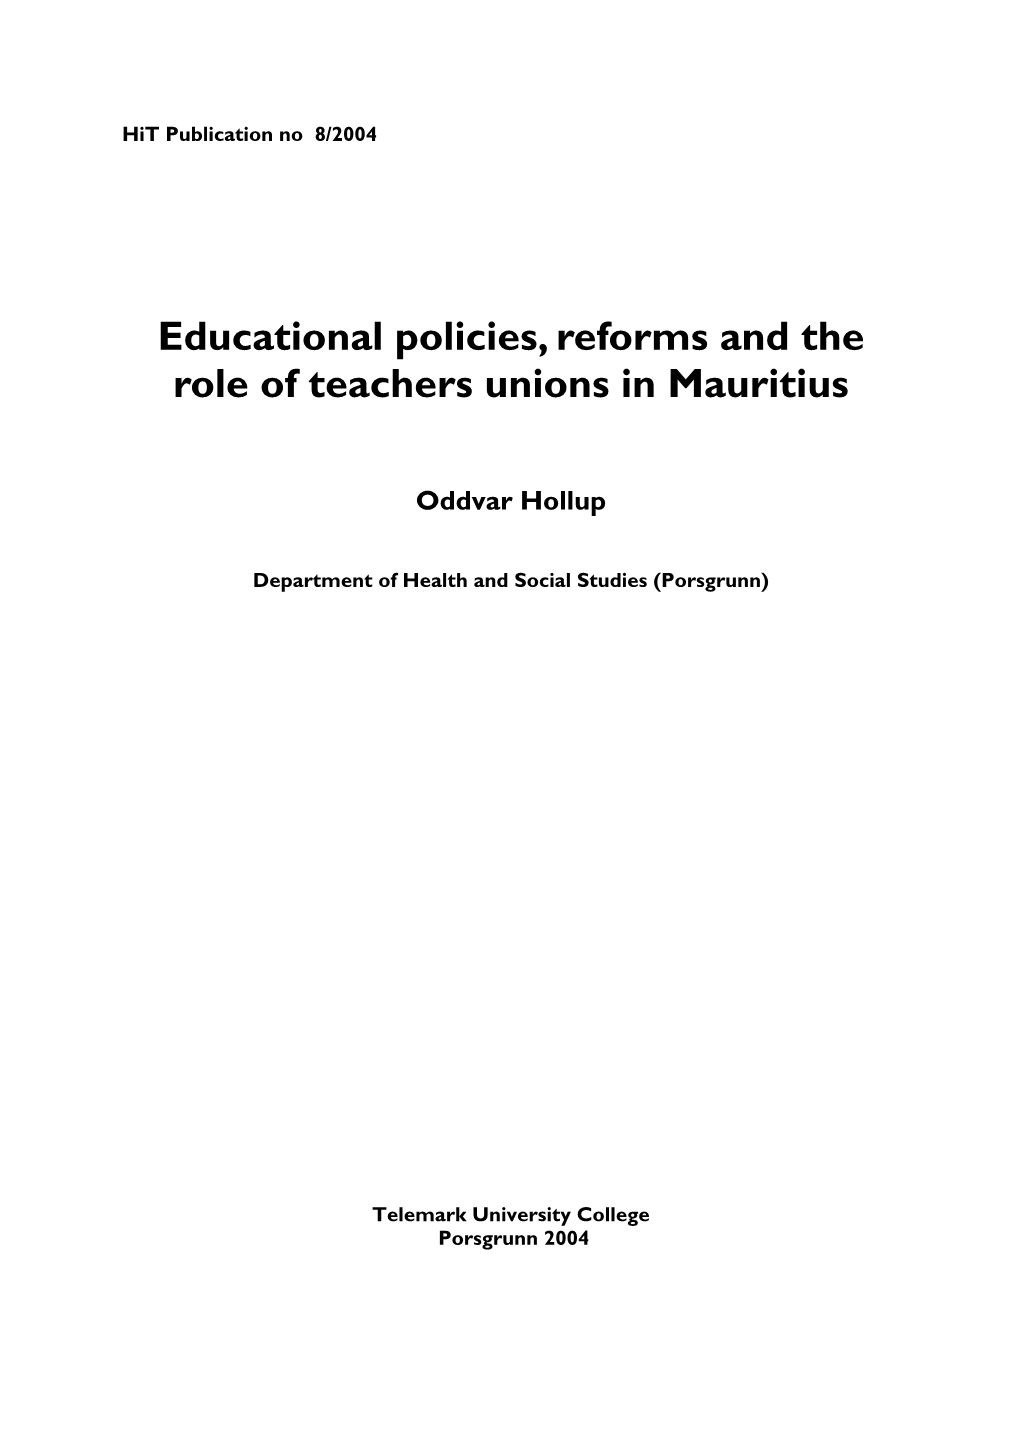 Educational Policies, Reforms and the Role of Teachers Unions in Mauritius